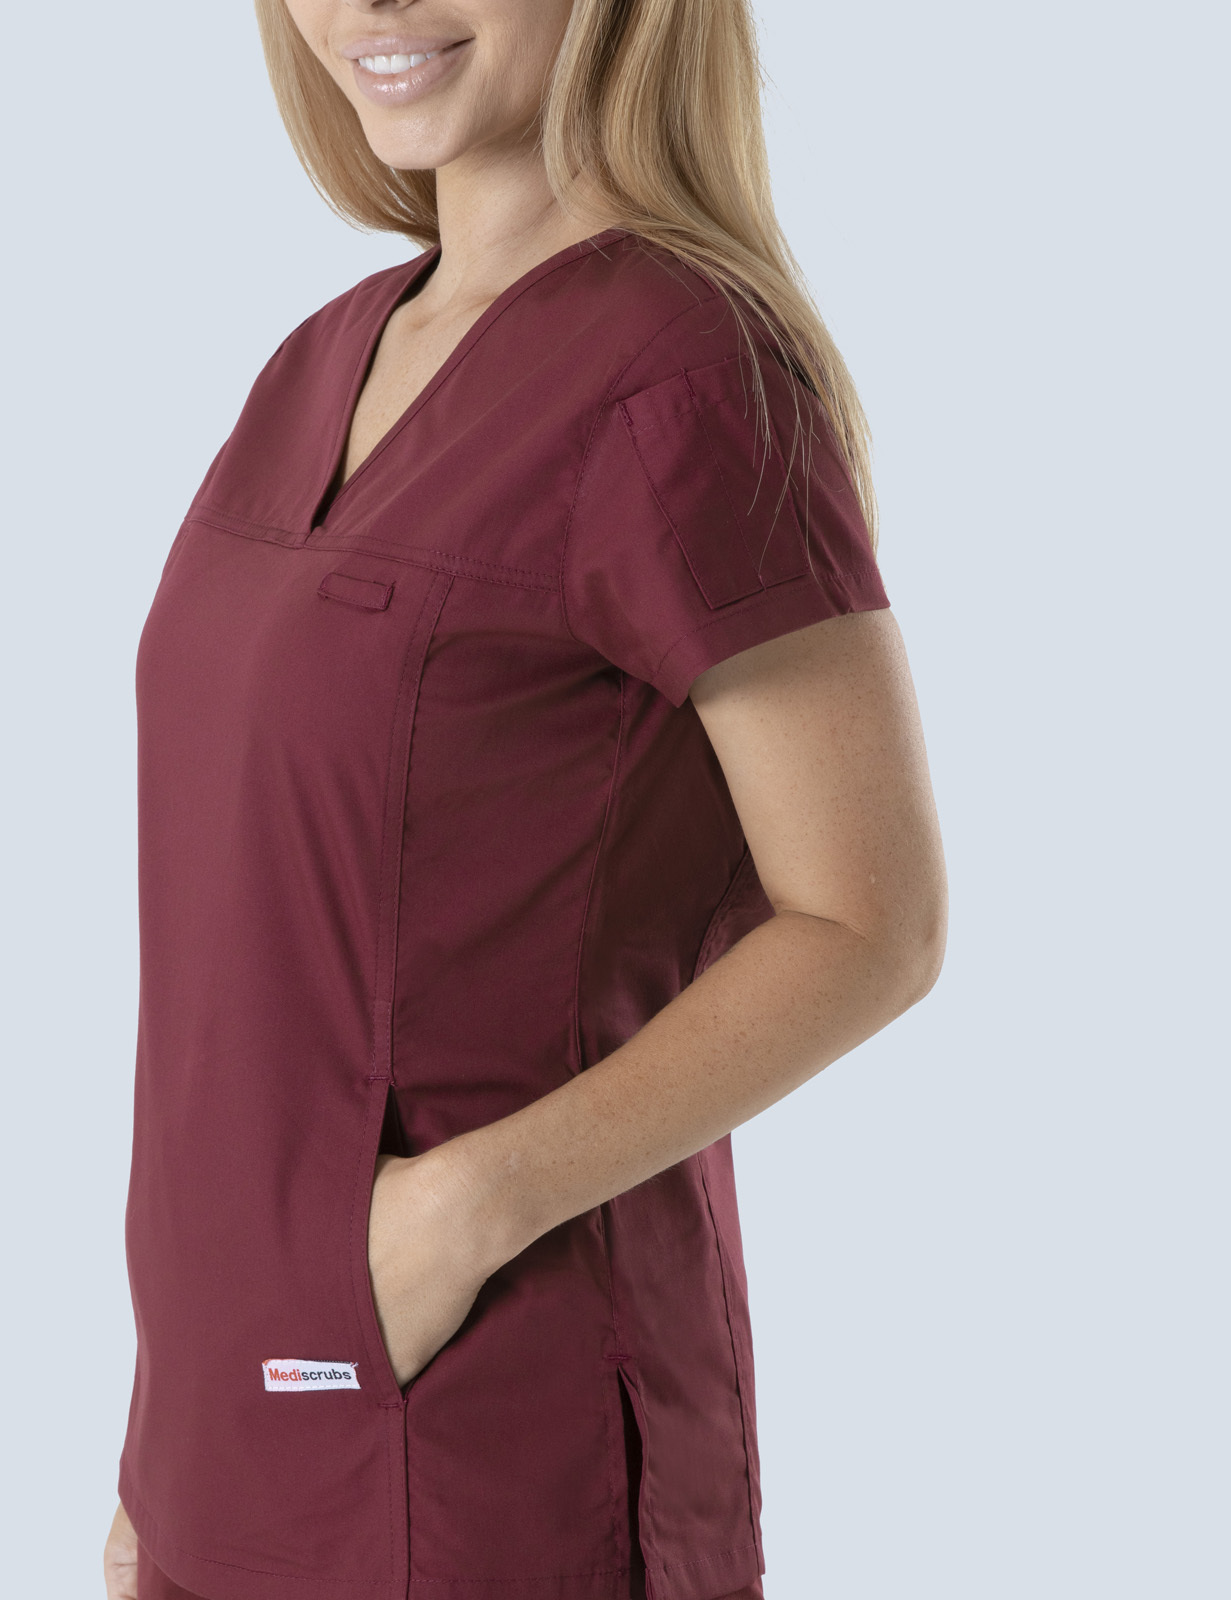 Women's Fit Solid Scrub Top - Burgundy - Large